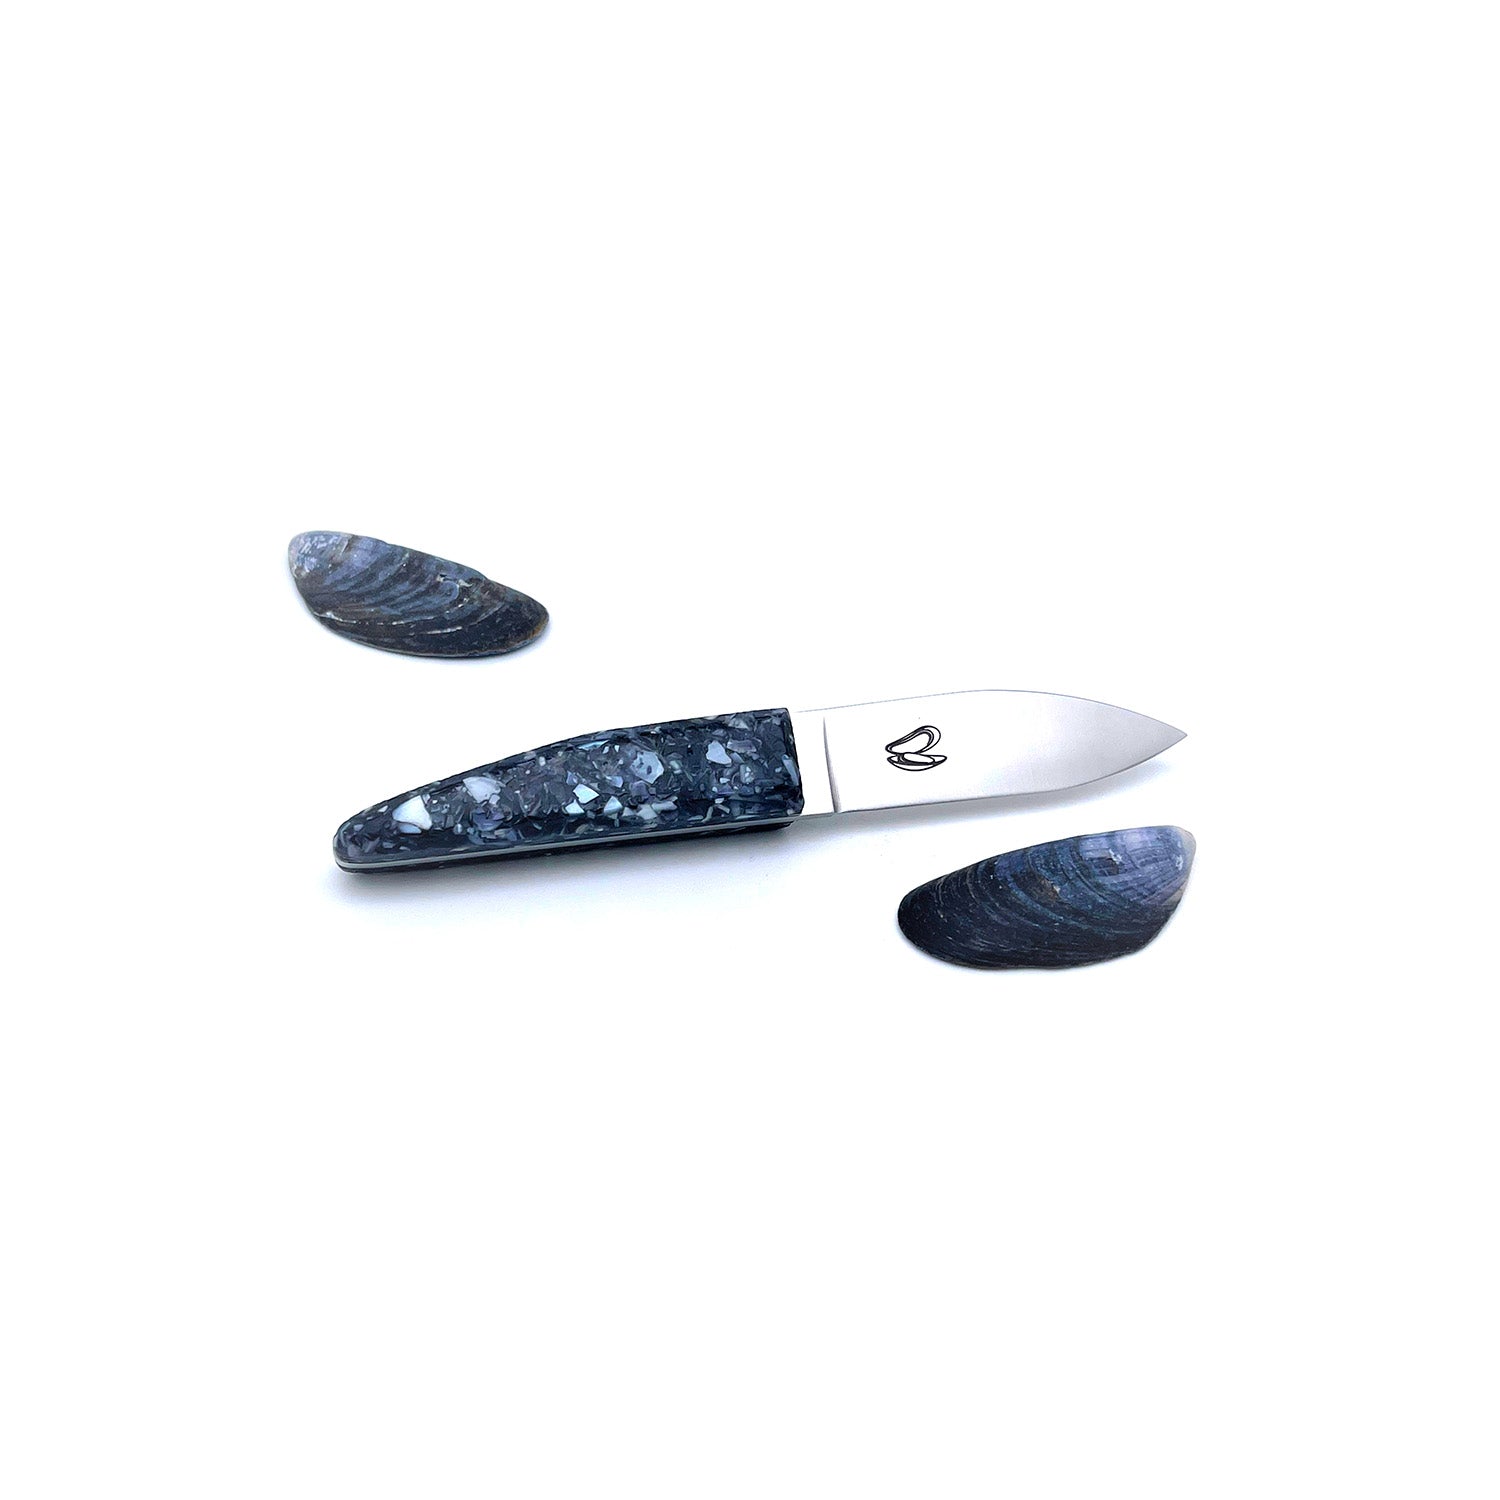 Small oyster knife with a handle made from recycled mussel shells